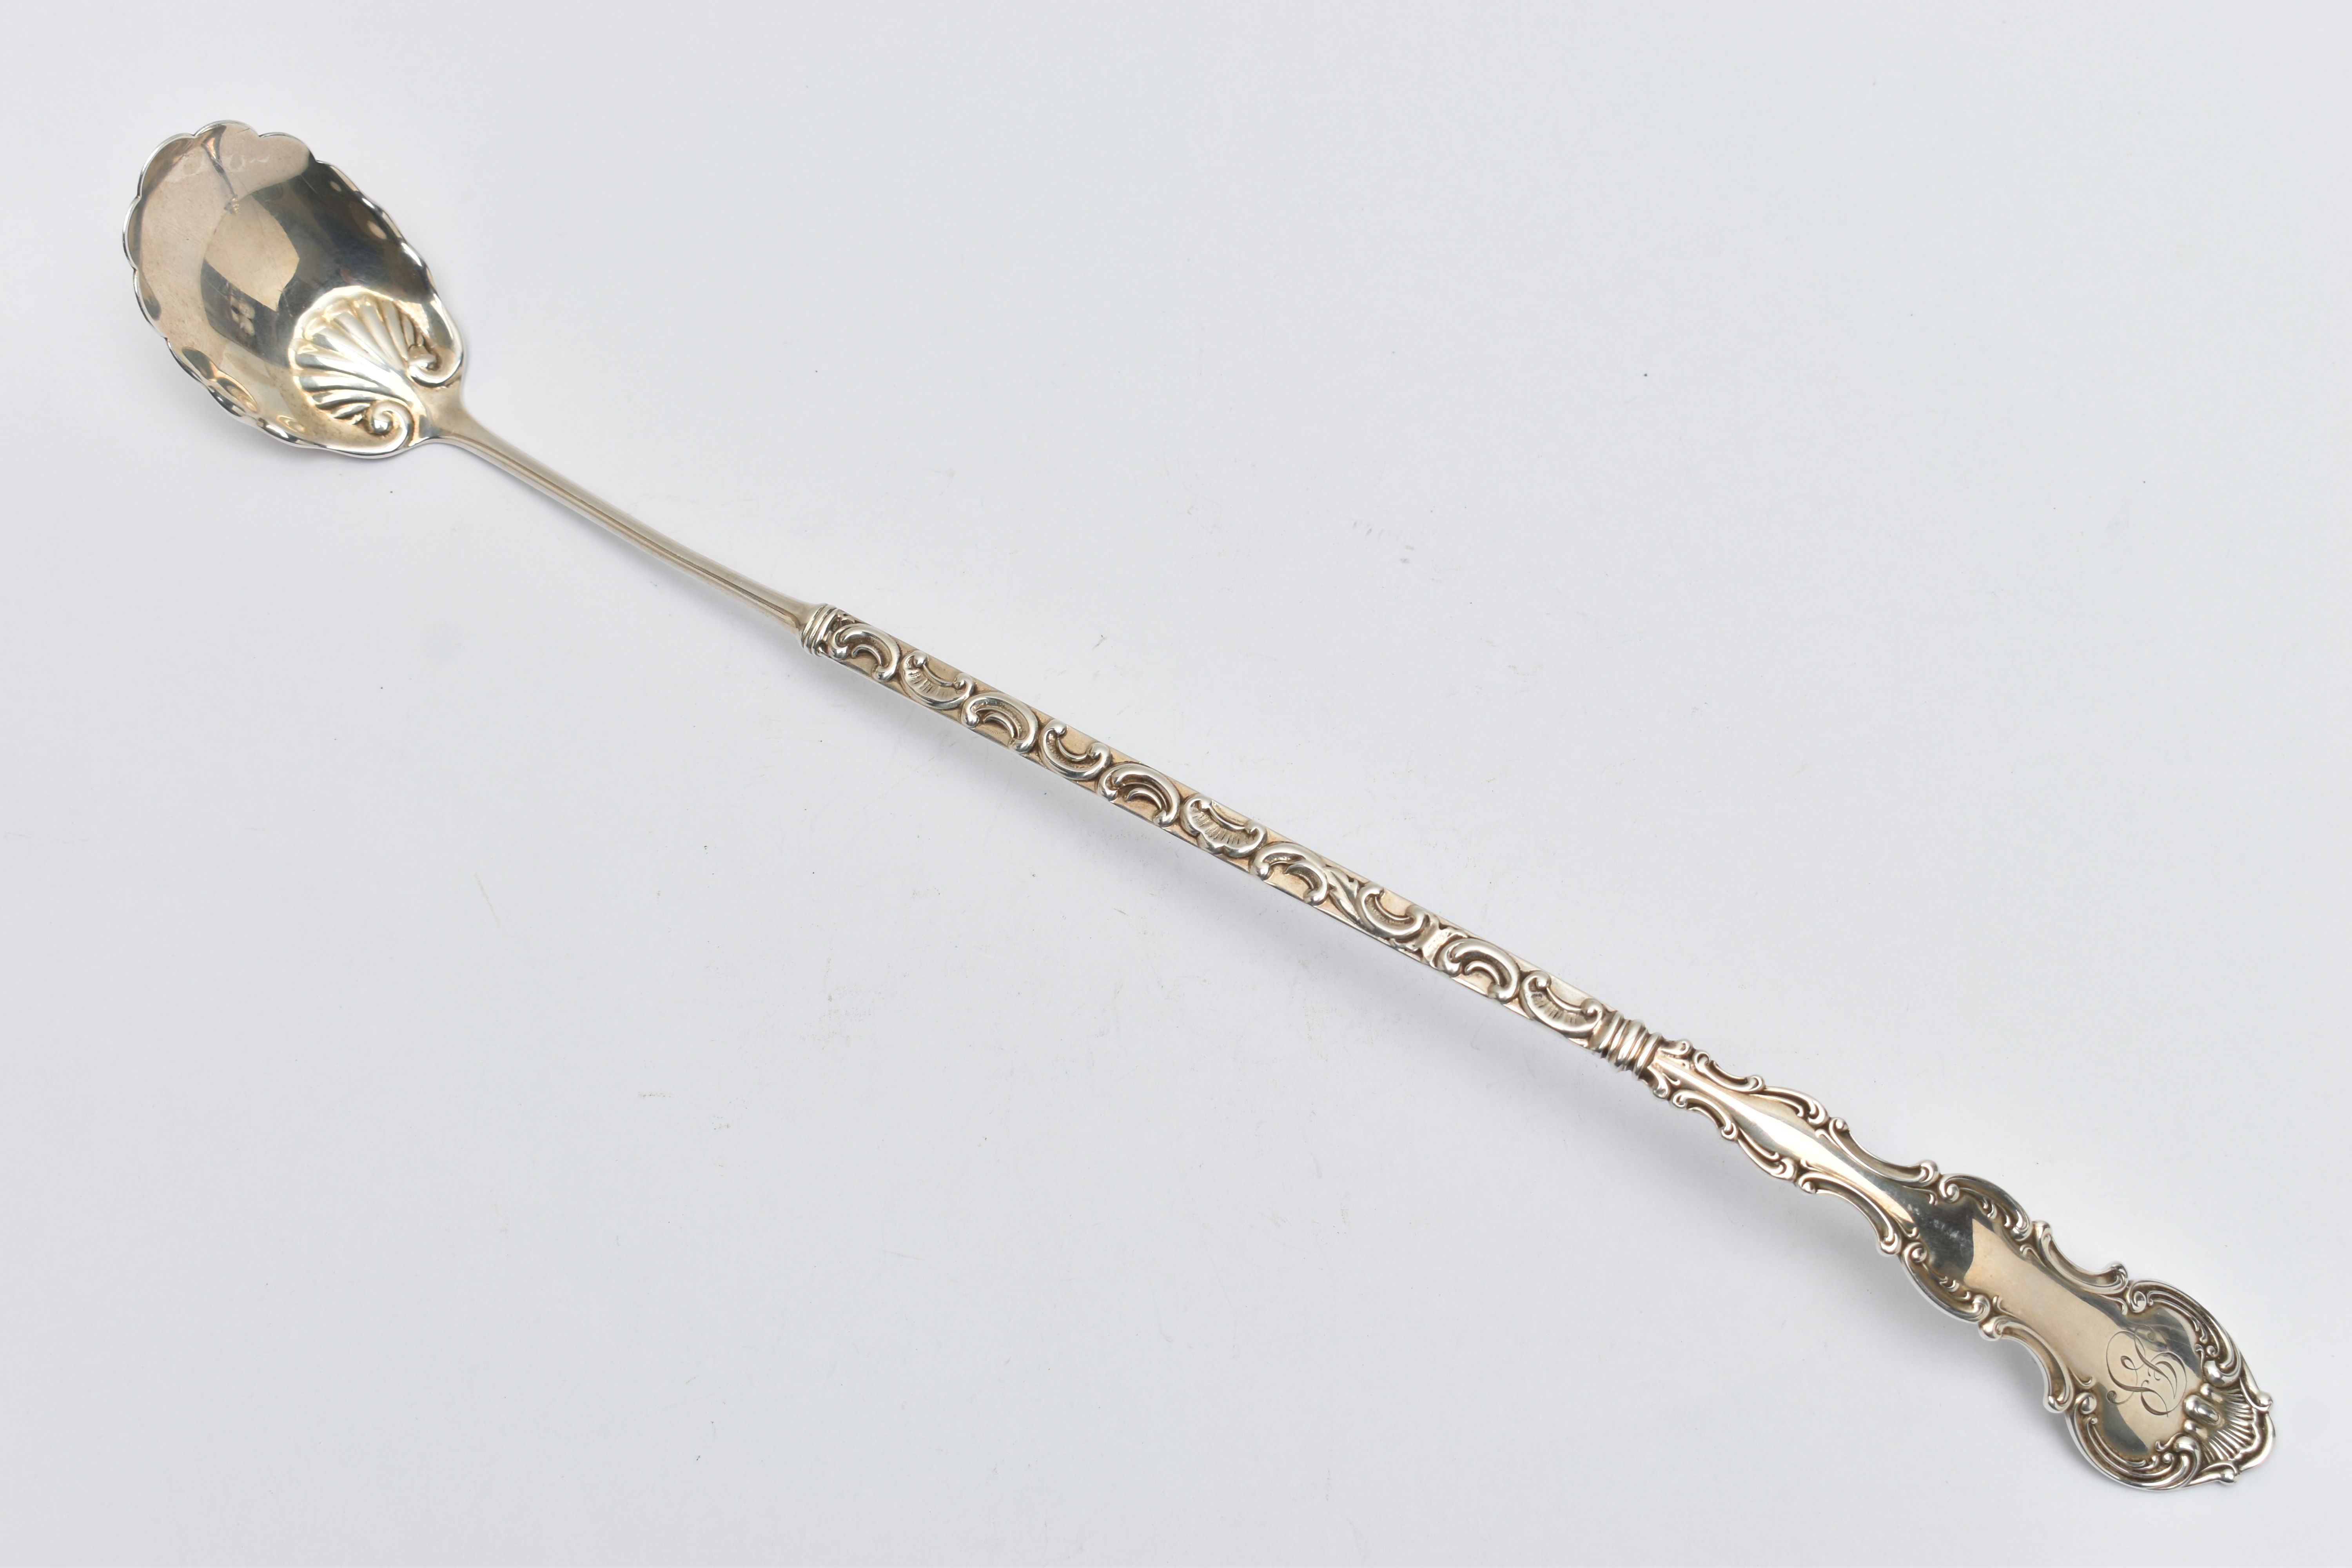 AN AMERICAN STERLING SILVER LADLE, the handle cast with scroll and shell decoration and engraved